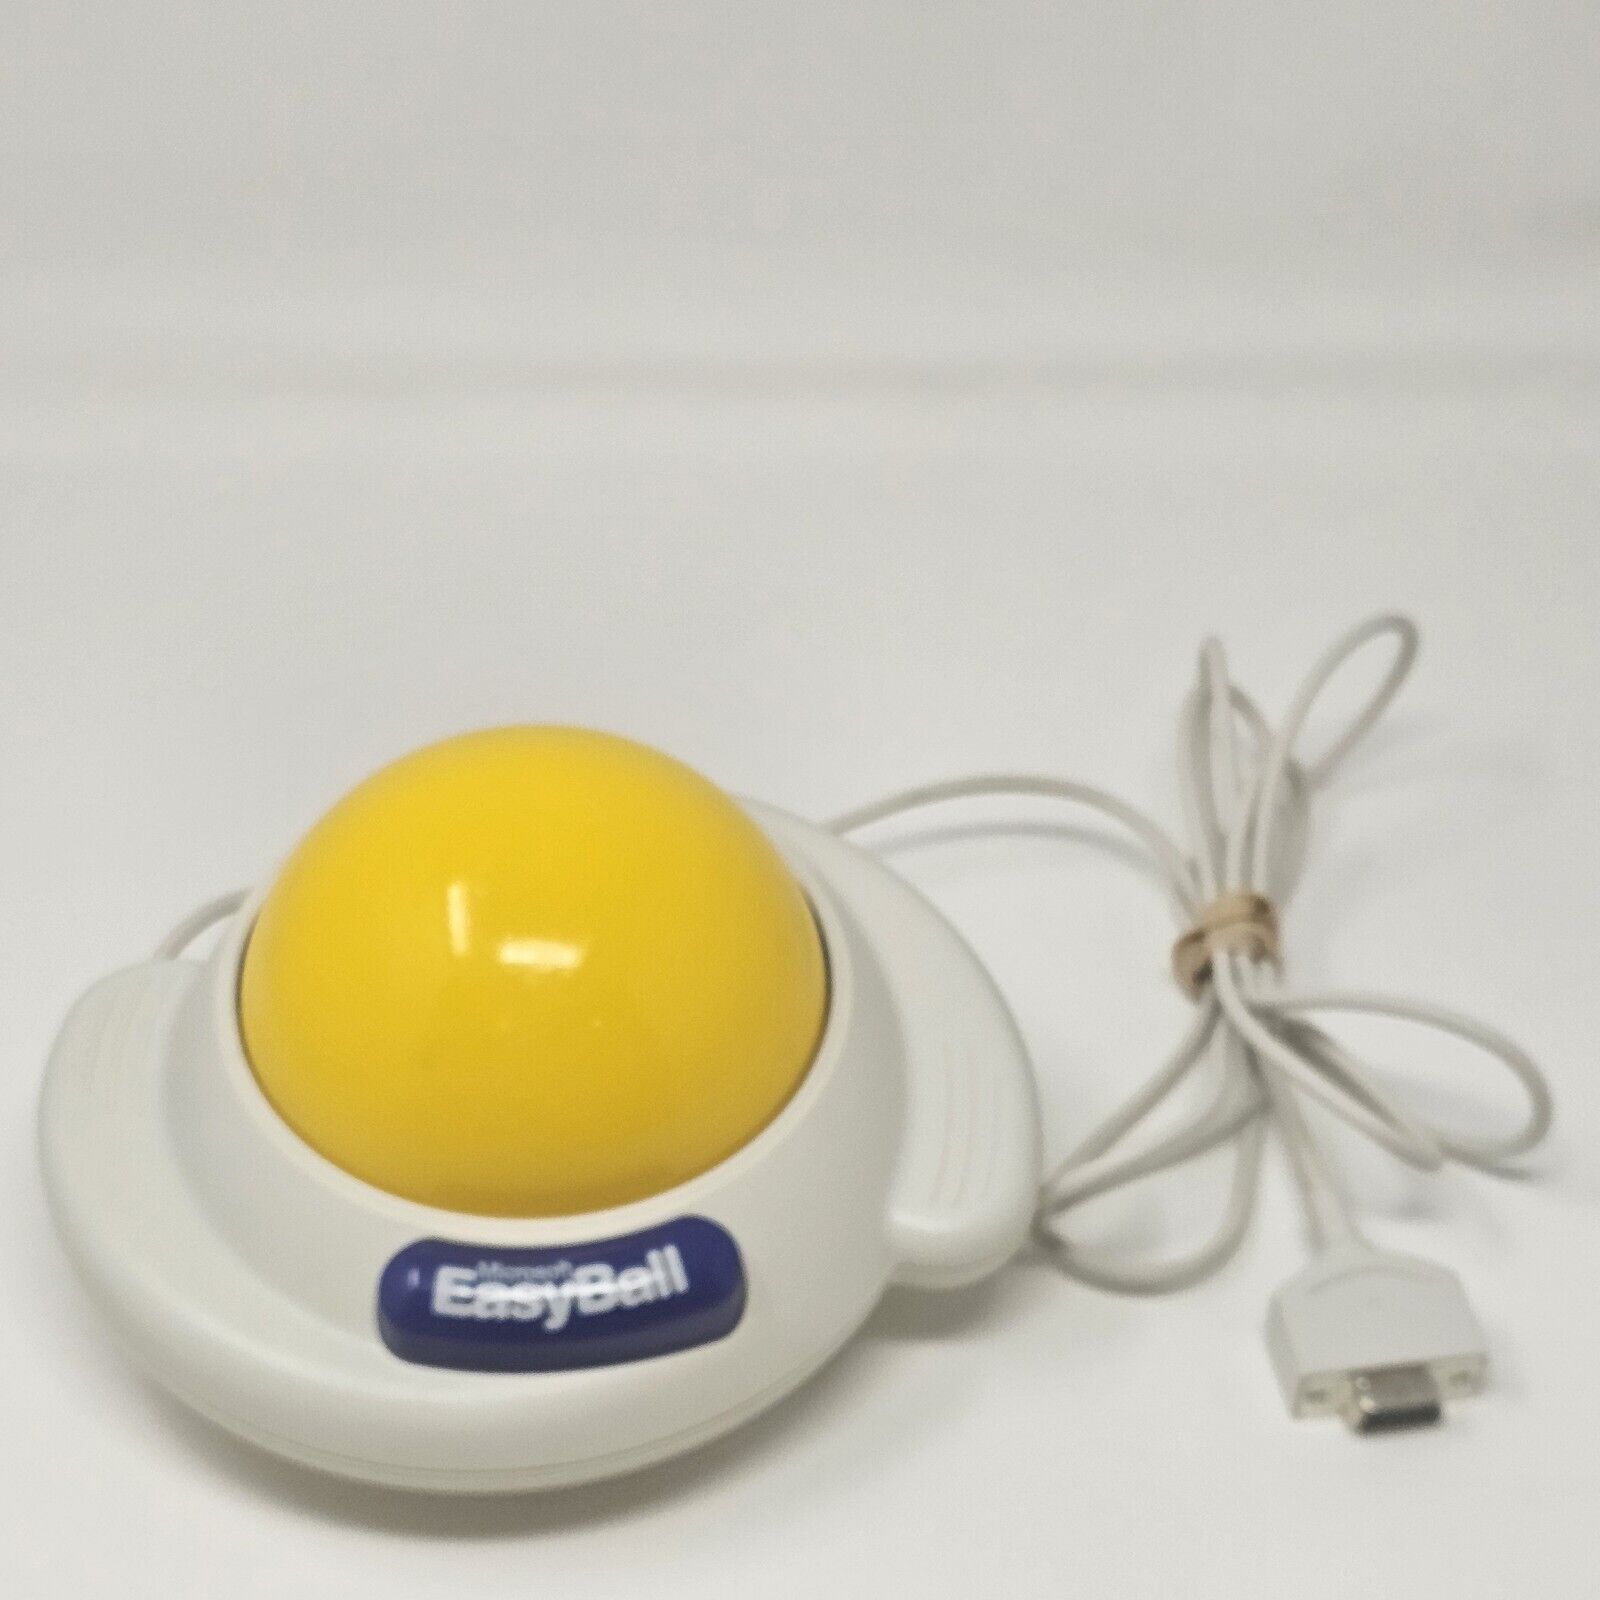 Vintage Microsoft Easyball Children’s Mouse Version 1.0 Kid Extra Large 